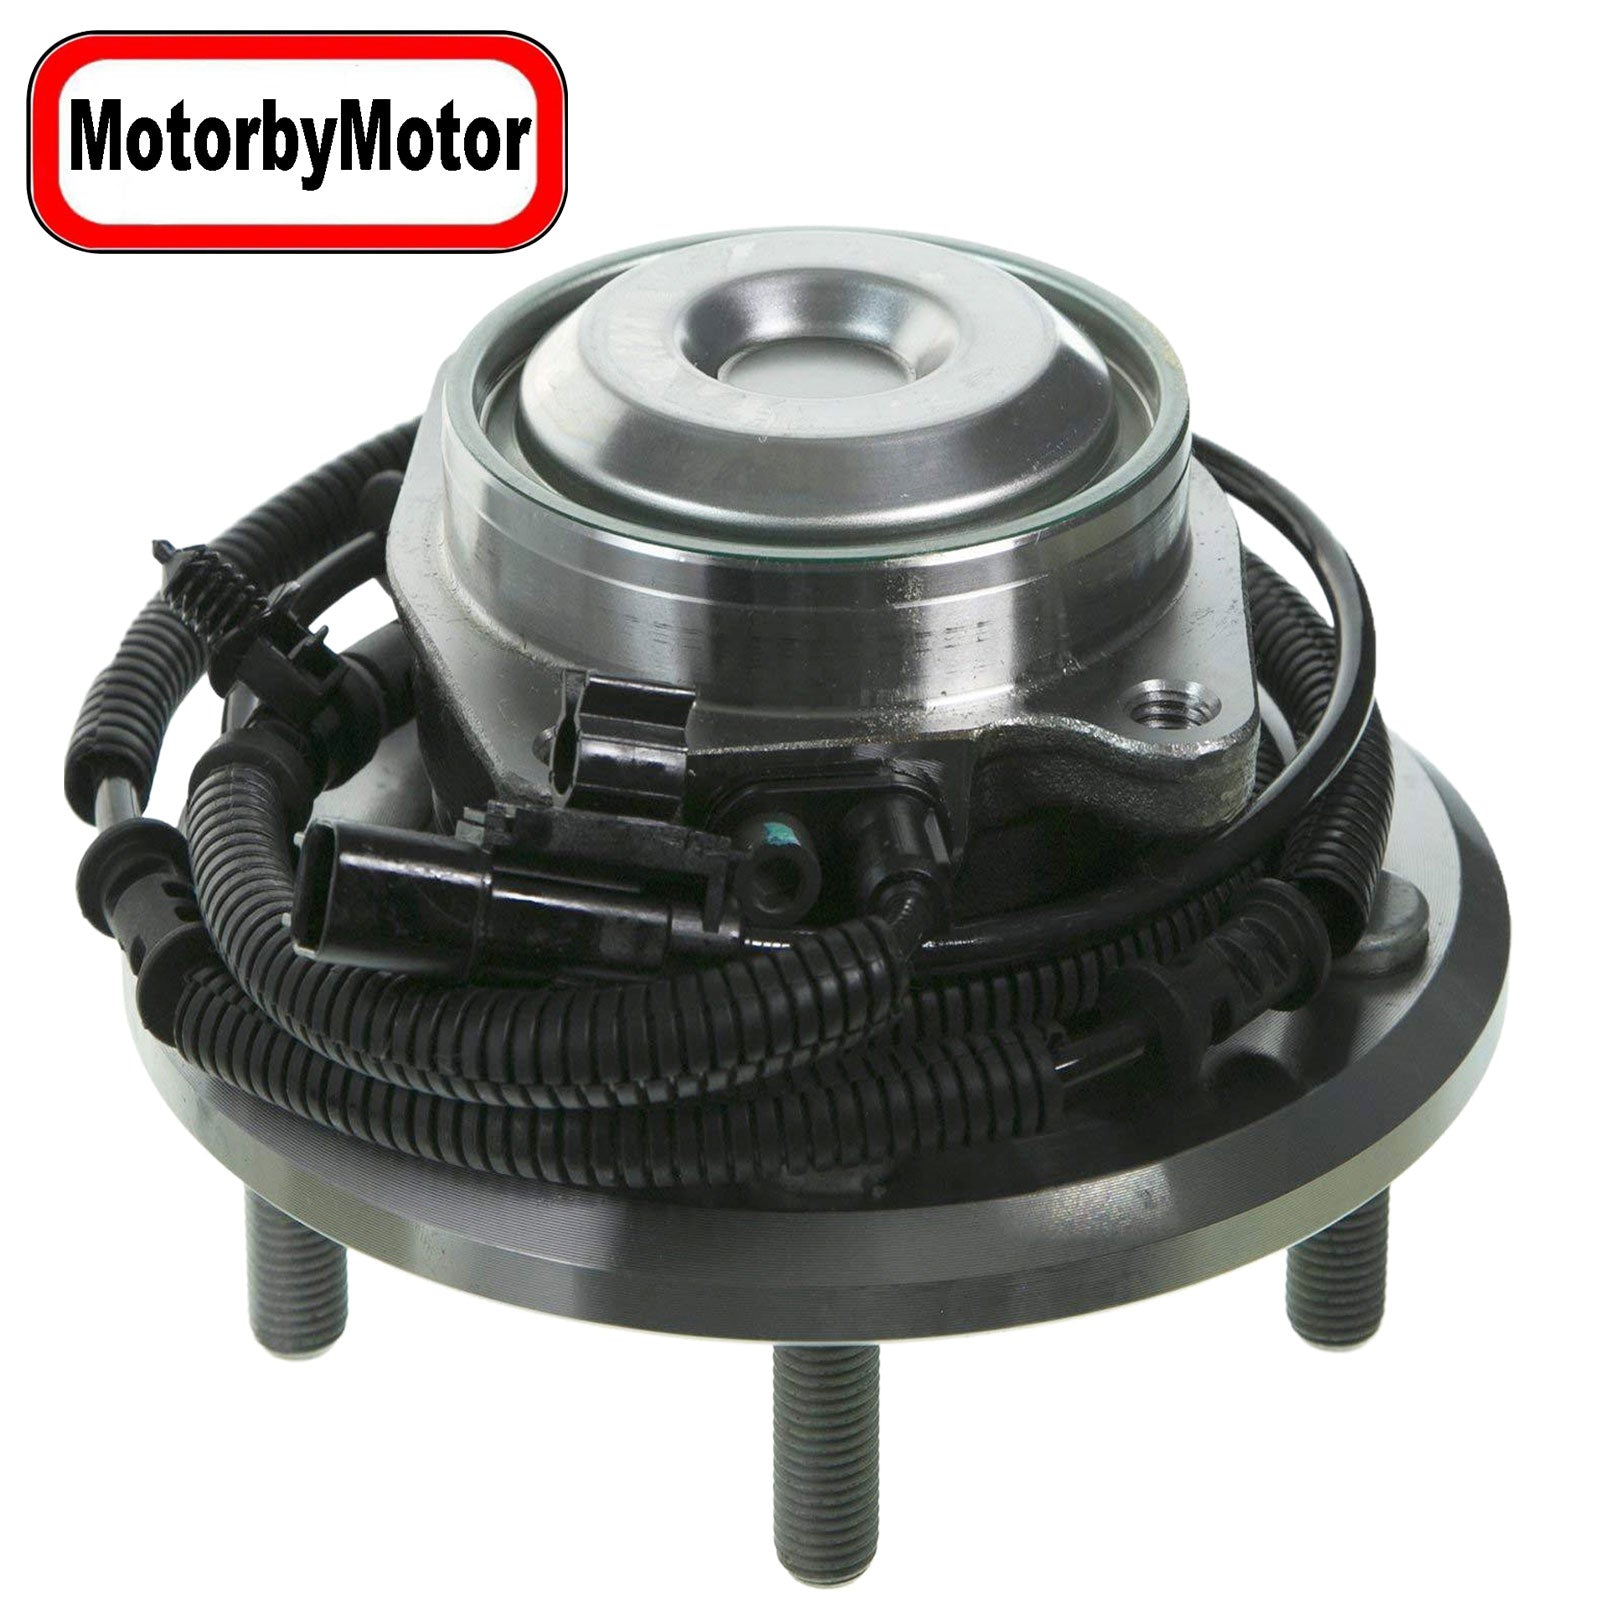 MotorbyMotor 512360 Rear Heavy Duty Wheel Bearing and Hub Assembly with 5 Lugs, Dodge Grand Caravan, Chrysler Town & Country, Volkswagen Routan  (All Models, w/ABS) MotorbyMotor